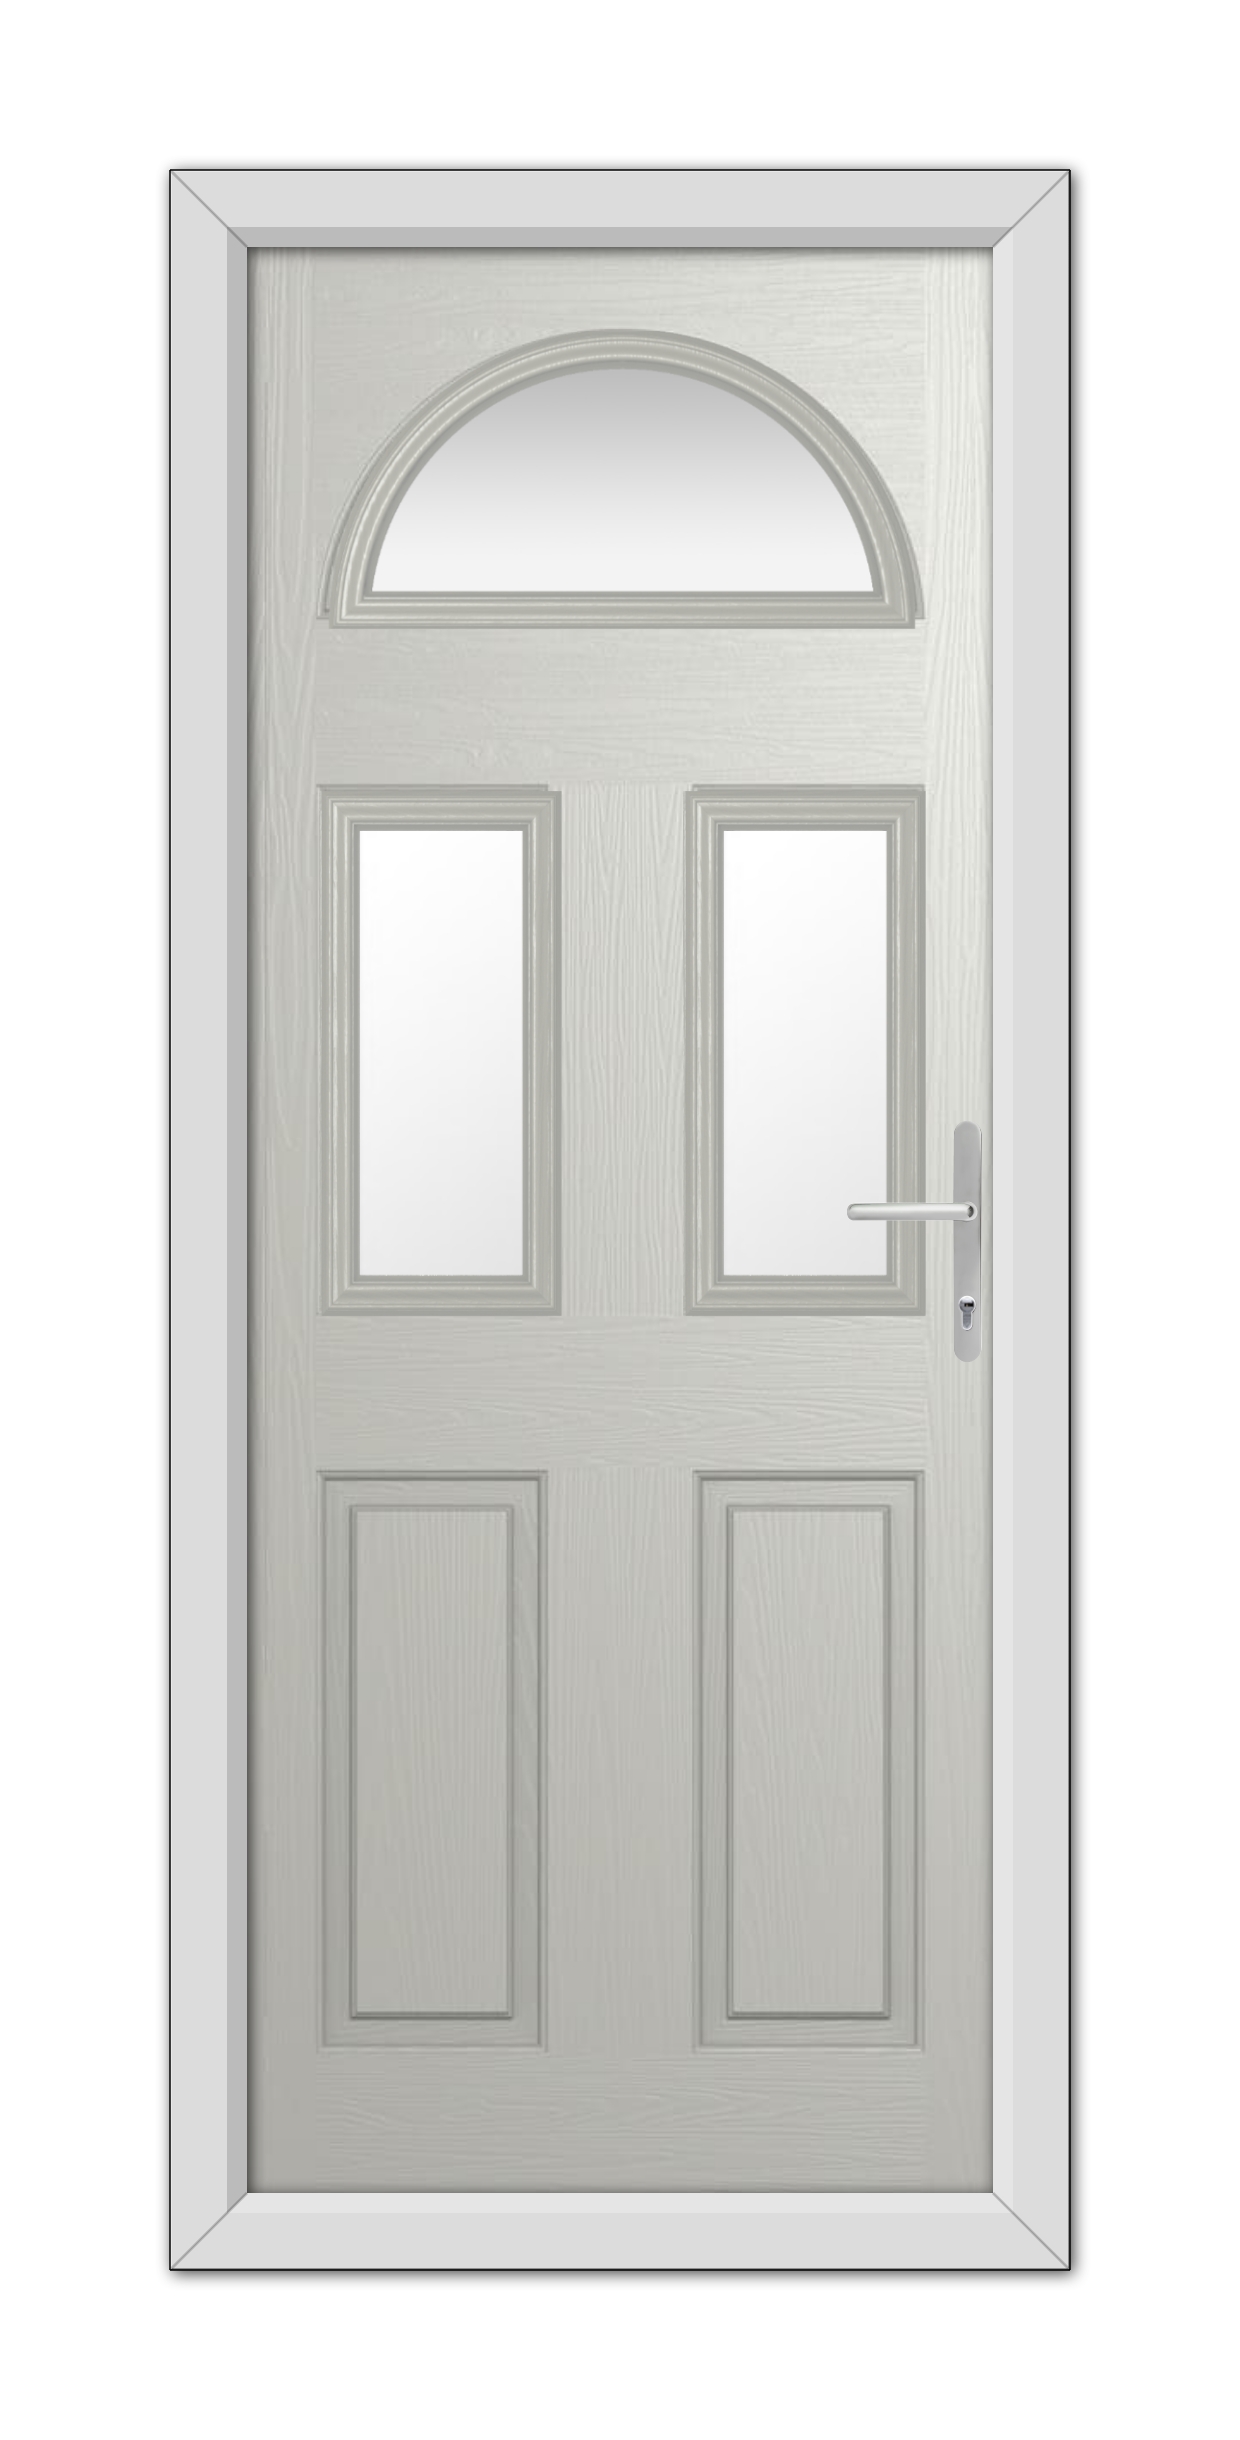 A modern Agate Grey Winslow 3 Composite Door 48mm Timber Core featuring an arched window at the top and four recessed panels, equipped with a metallic handle on the right side.